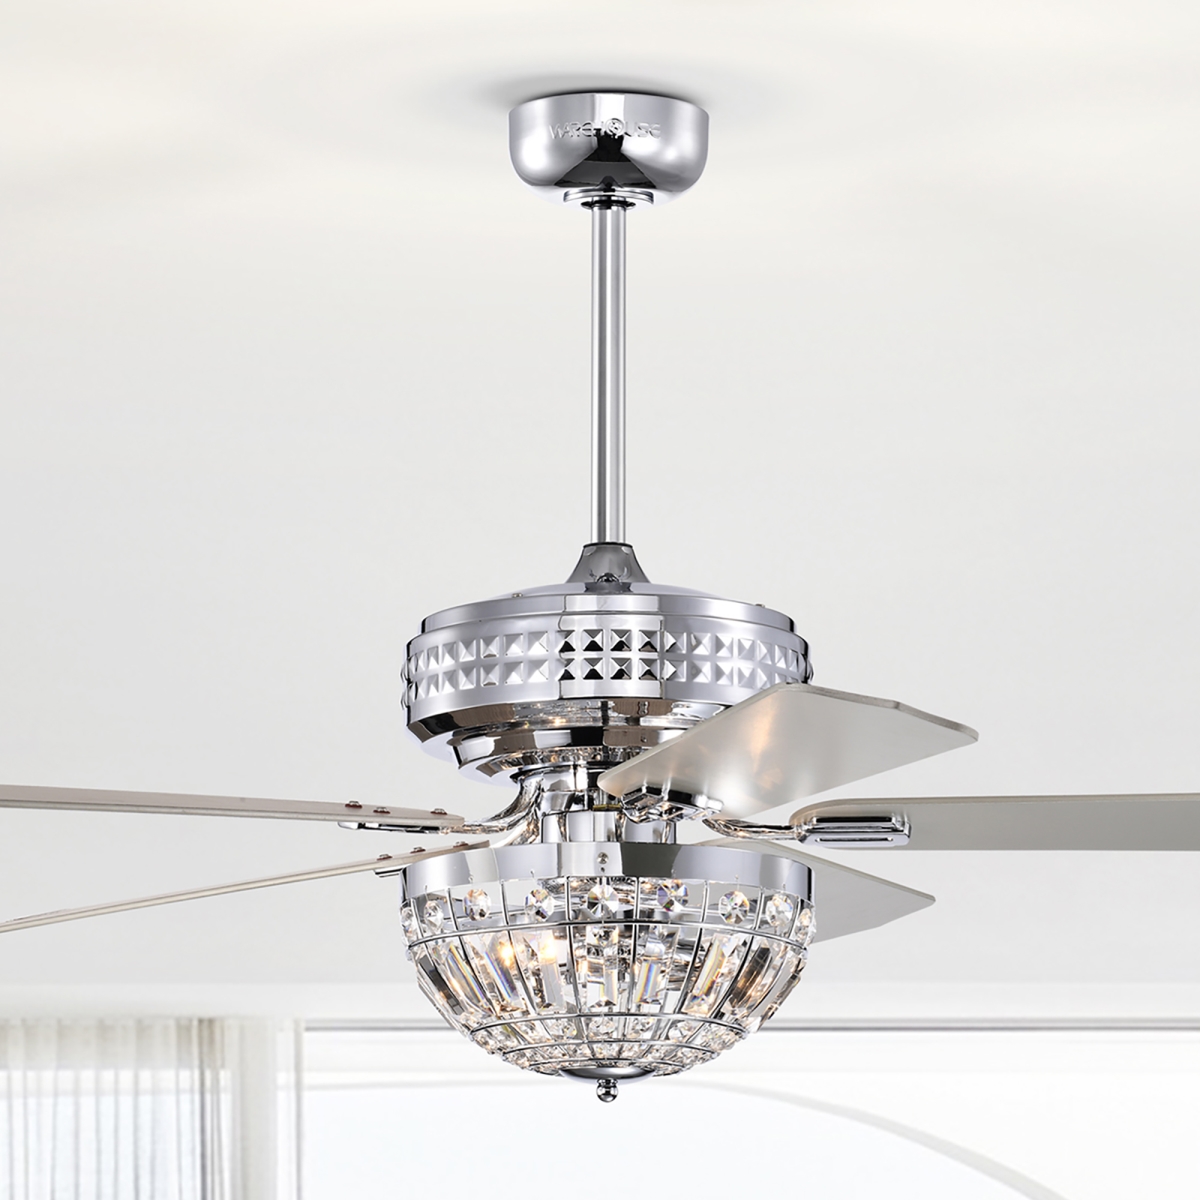 Alora 52 in. 3-Light Indoor Polished Chrome Finish Ceiling Fan with Light Kit